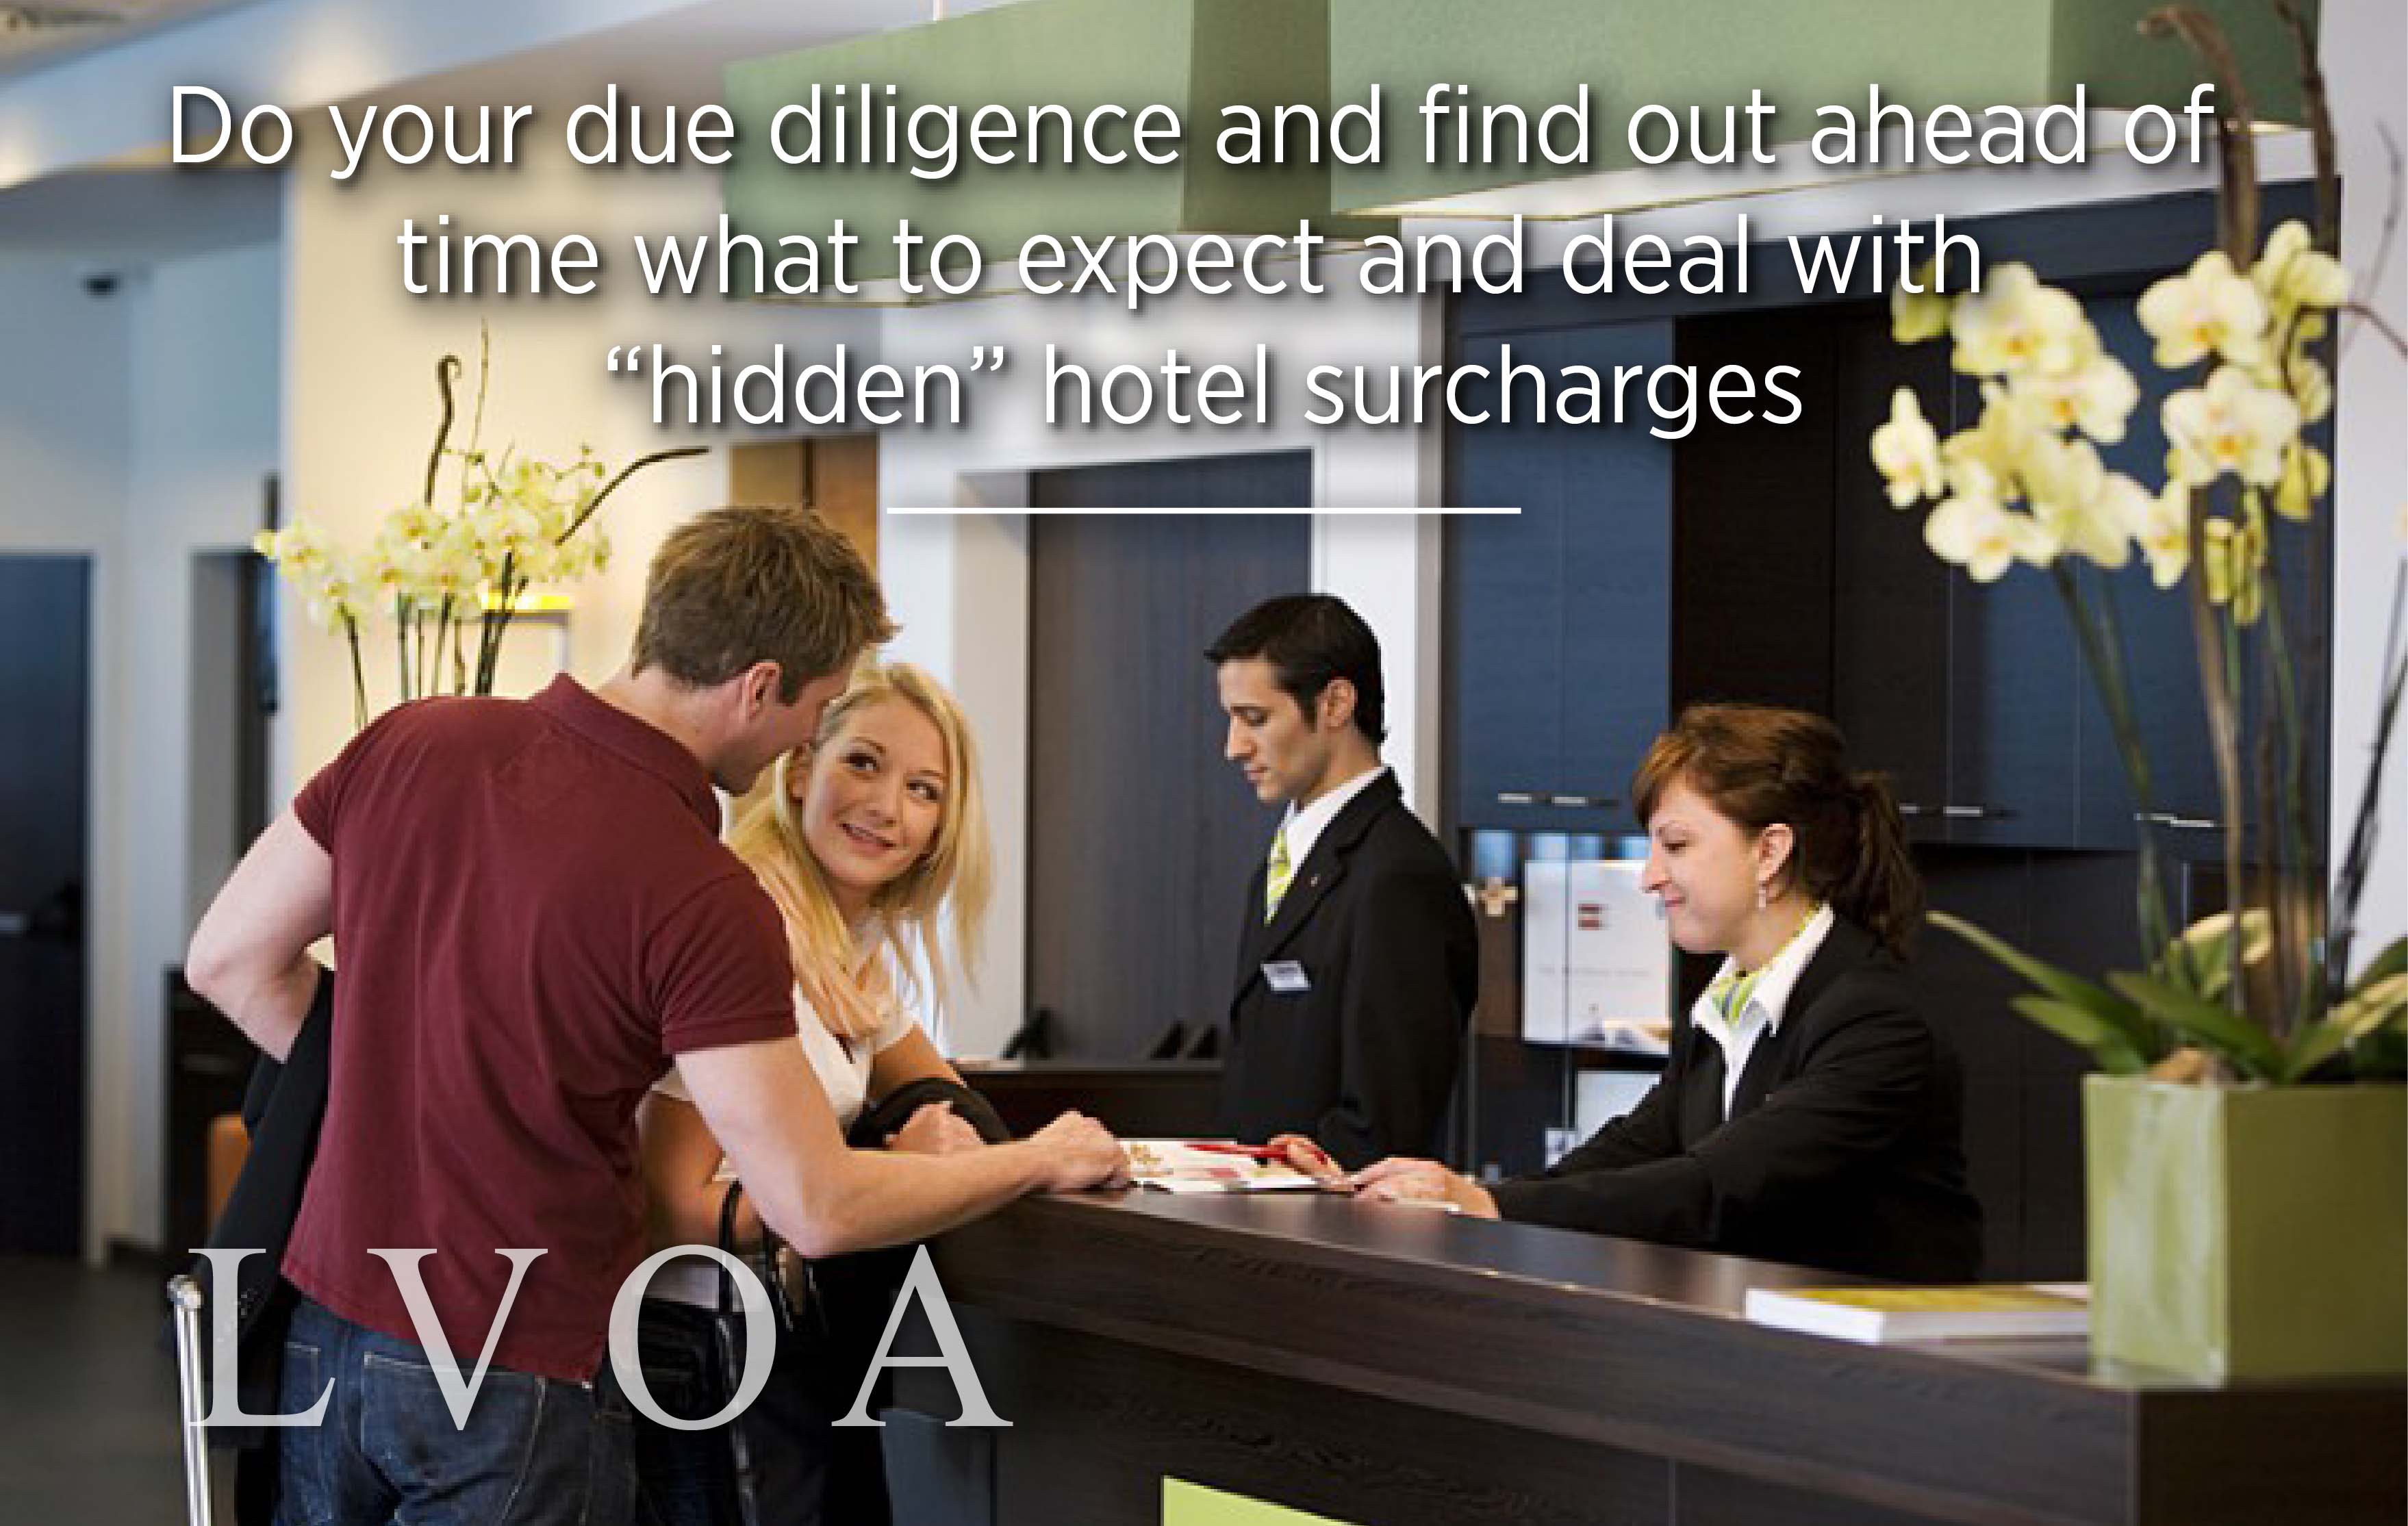 Do-your-due-diligence-and-find-out-ahead-of-time-what-to-expect-and-deal-with-hidden-hotel-surcharges_LVO_Associates